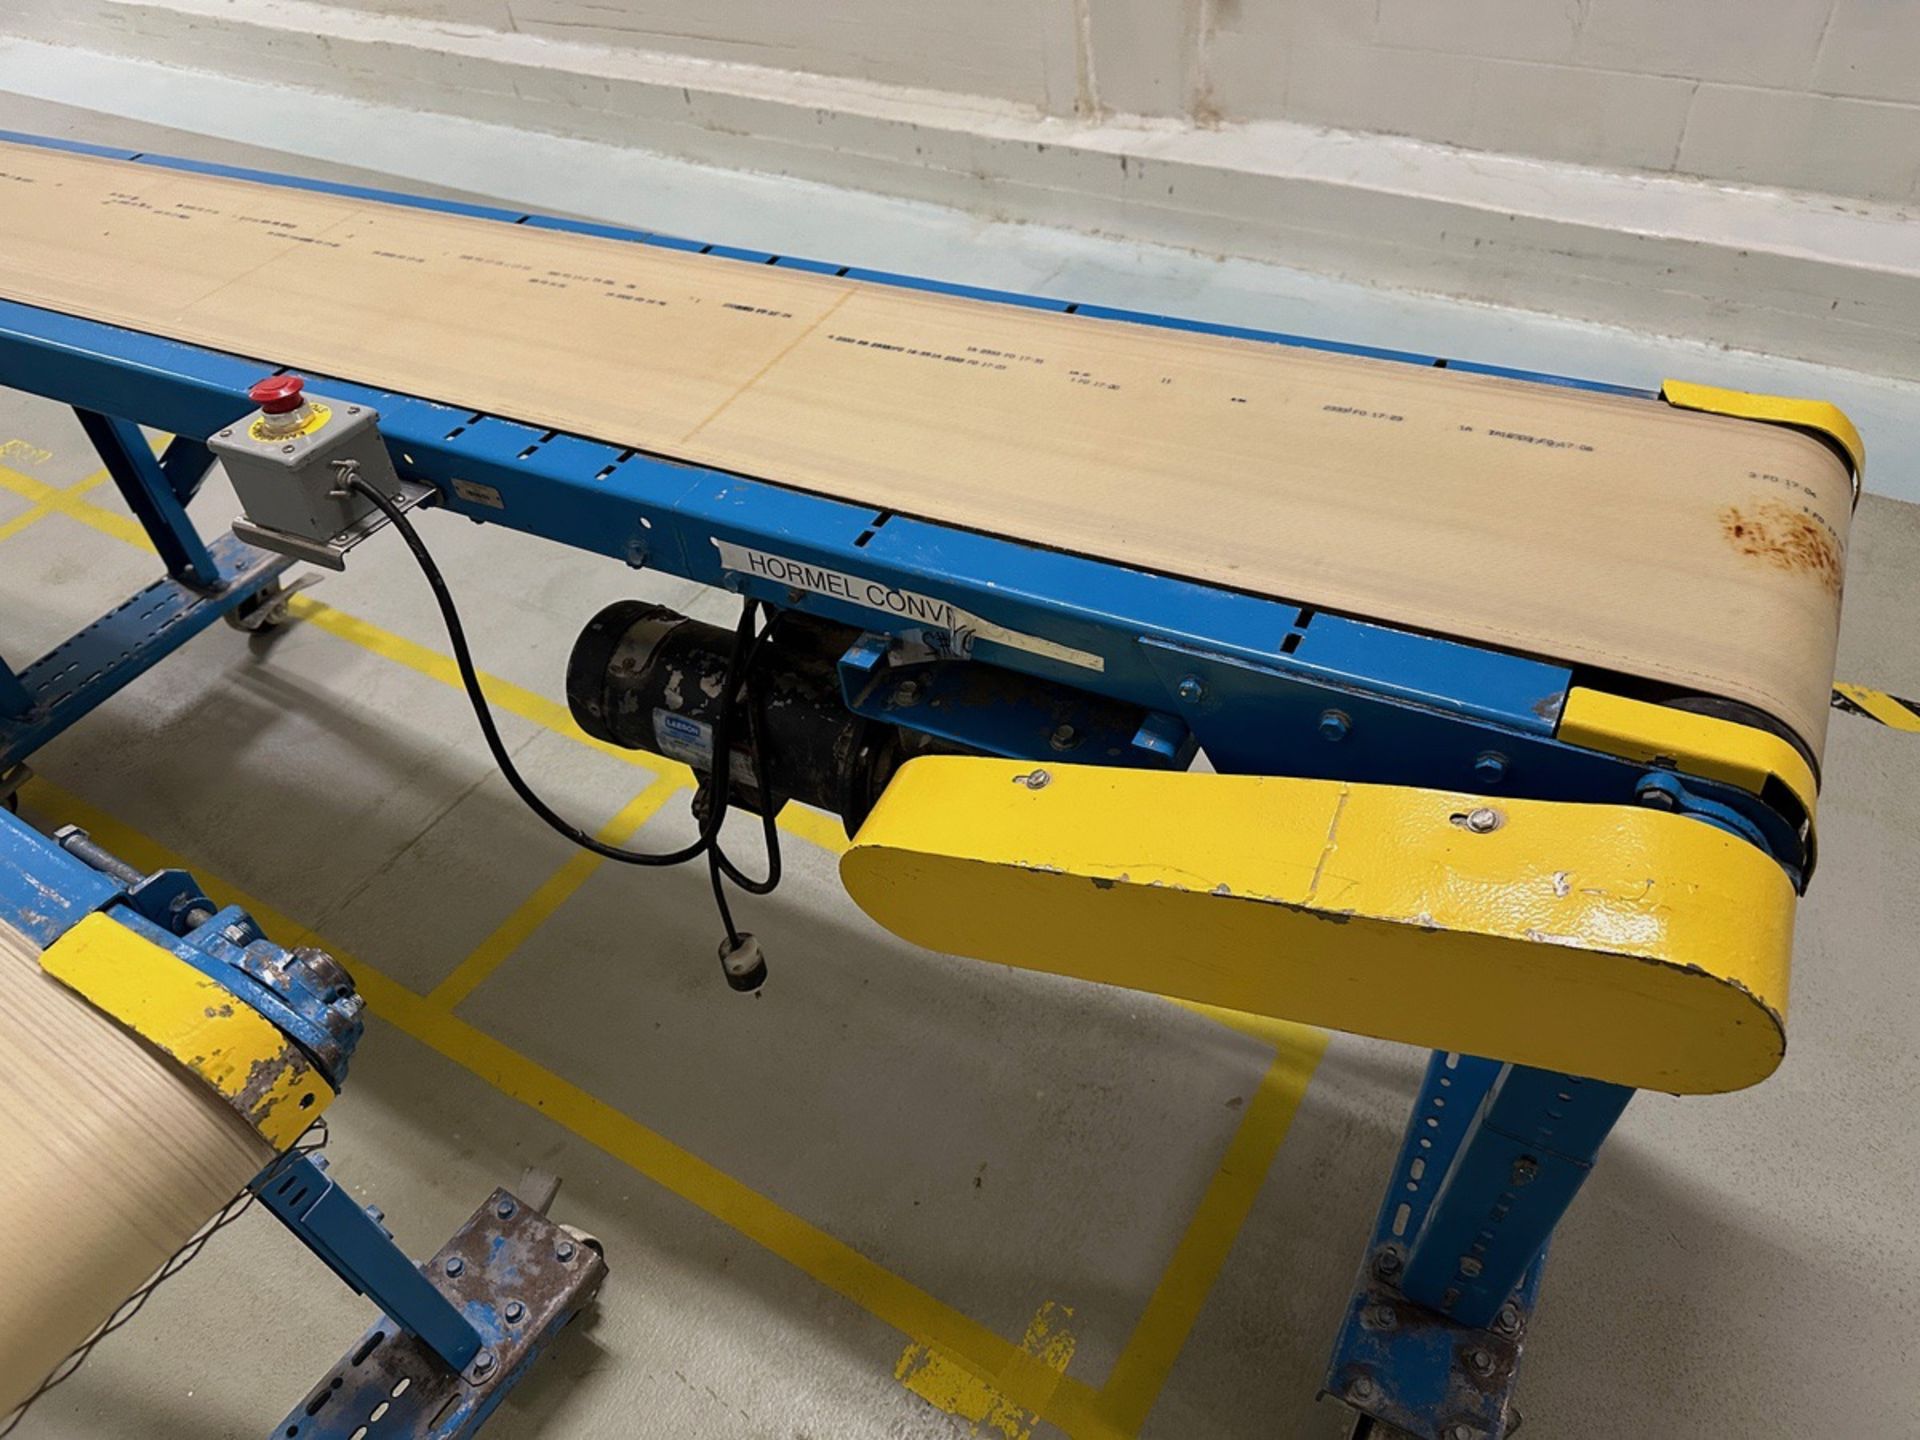 New London Belt Conveyor (Approx. 1' x 16') | Rig Fee $200 - Image 2 of 2